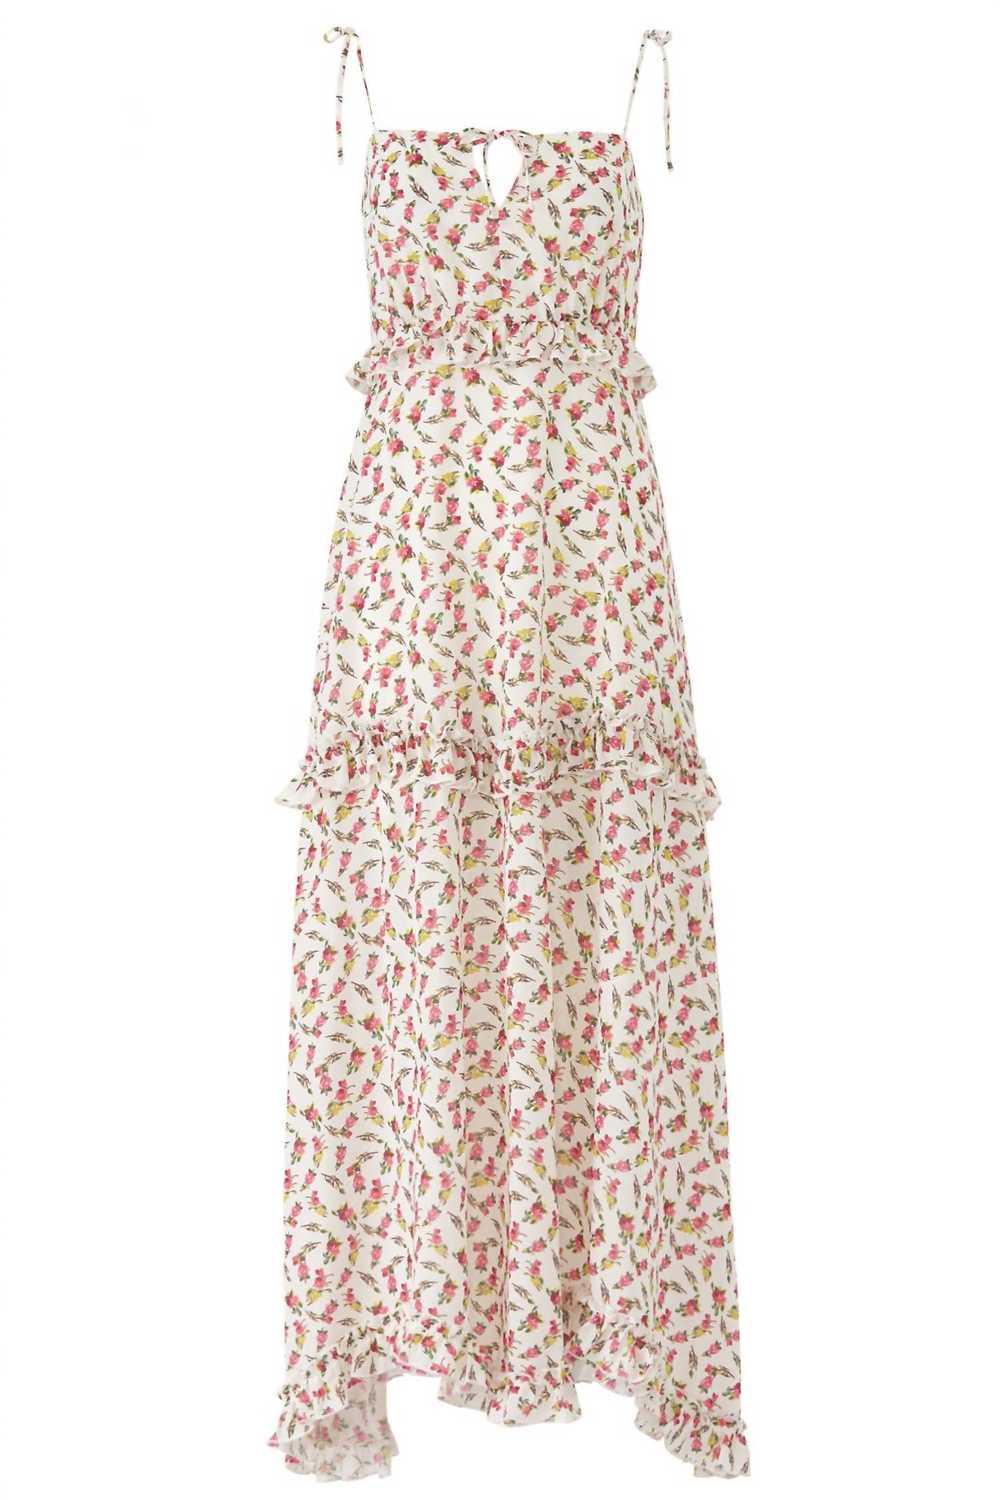 Slate & Willow pre-loved ivory rose floral maxi d… - image 4